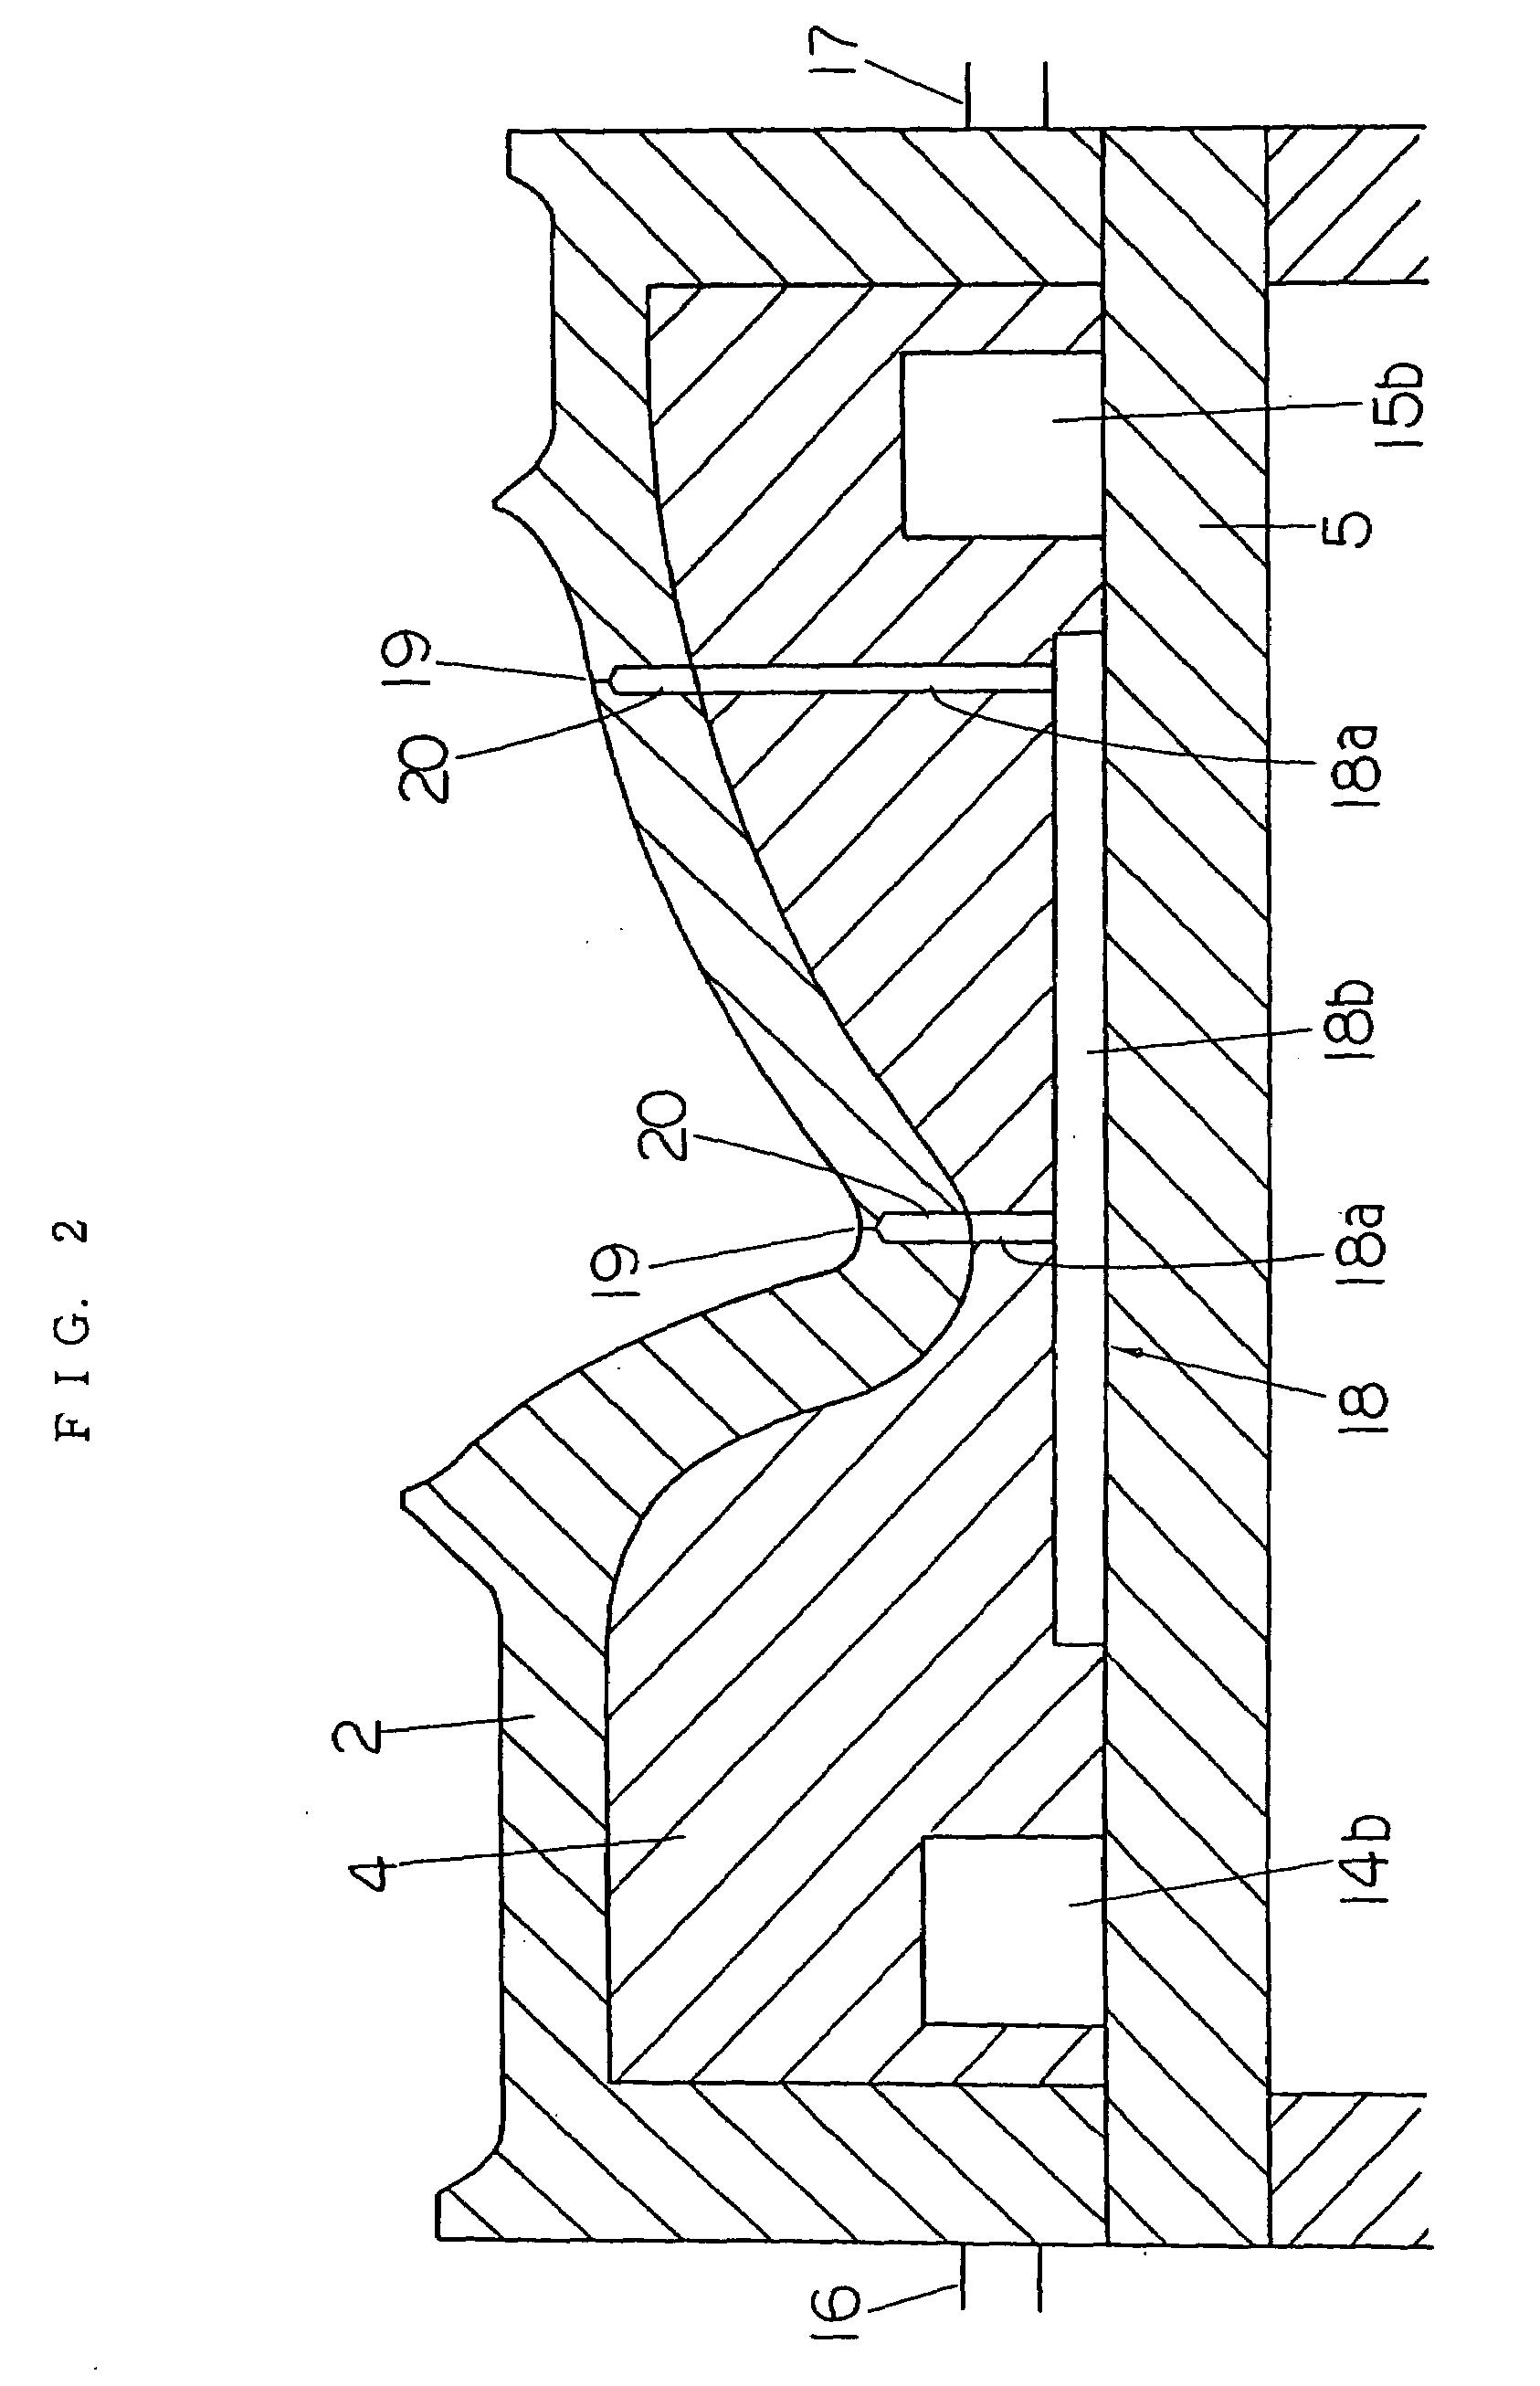 Metal mold device for blow molding